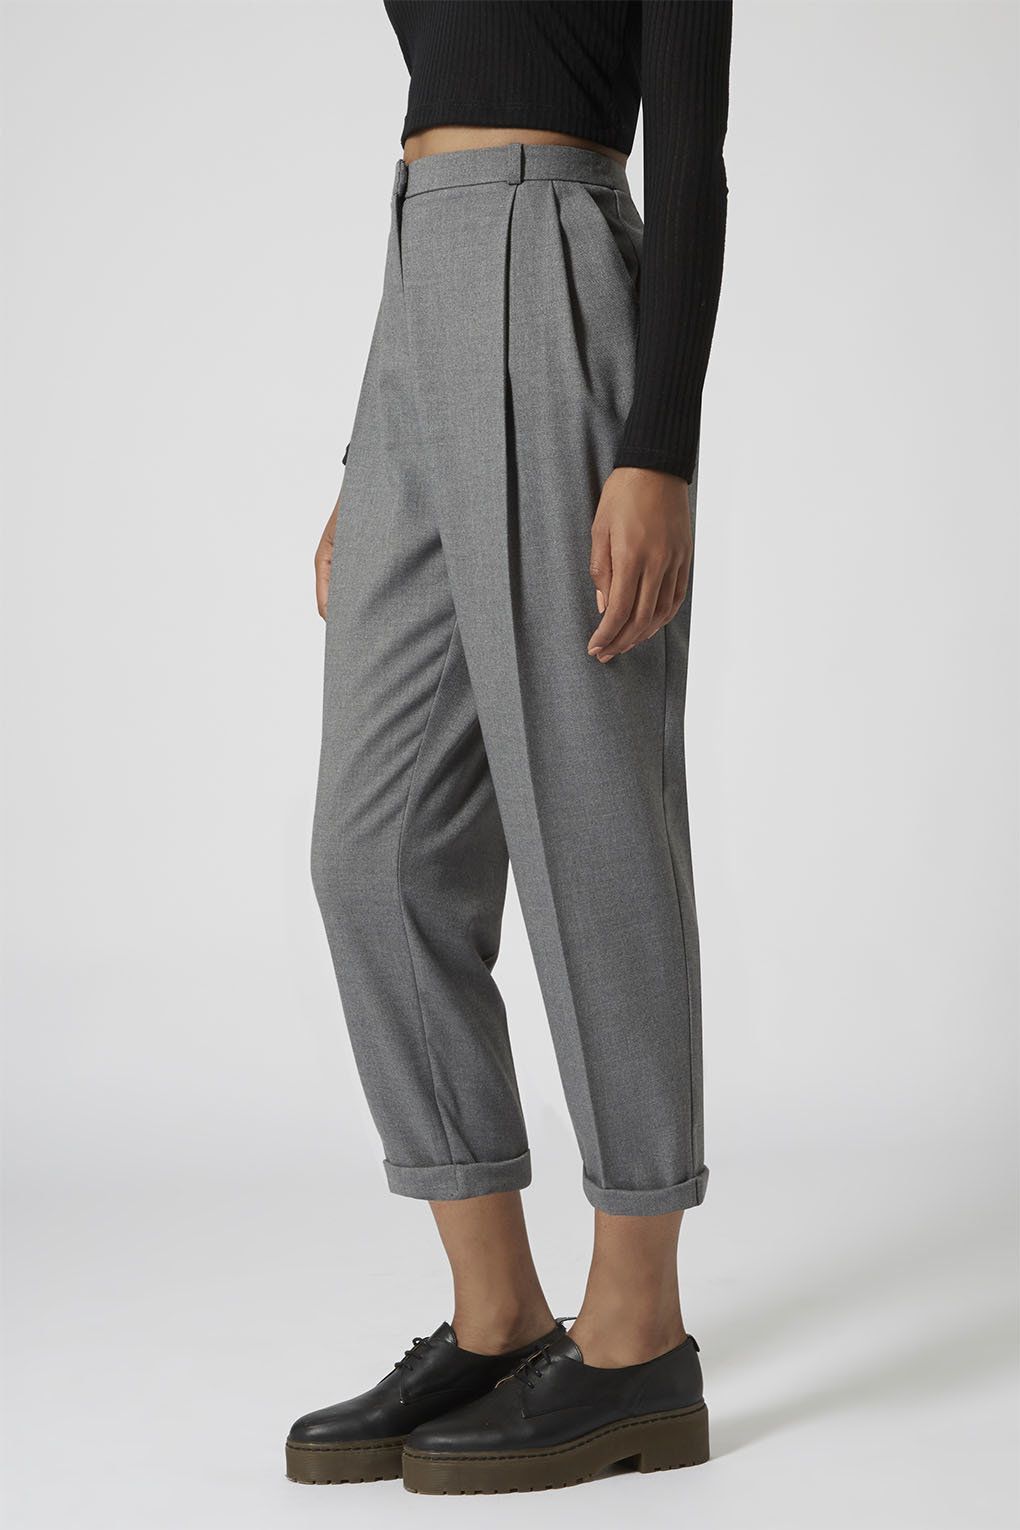 Flannel Mensy Crop Trousers - Trousers - Clothing - Topshop